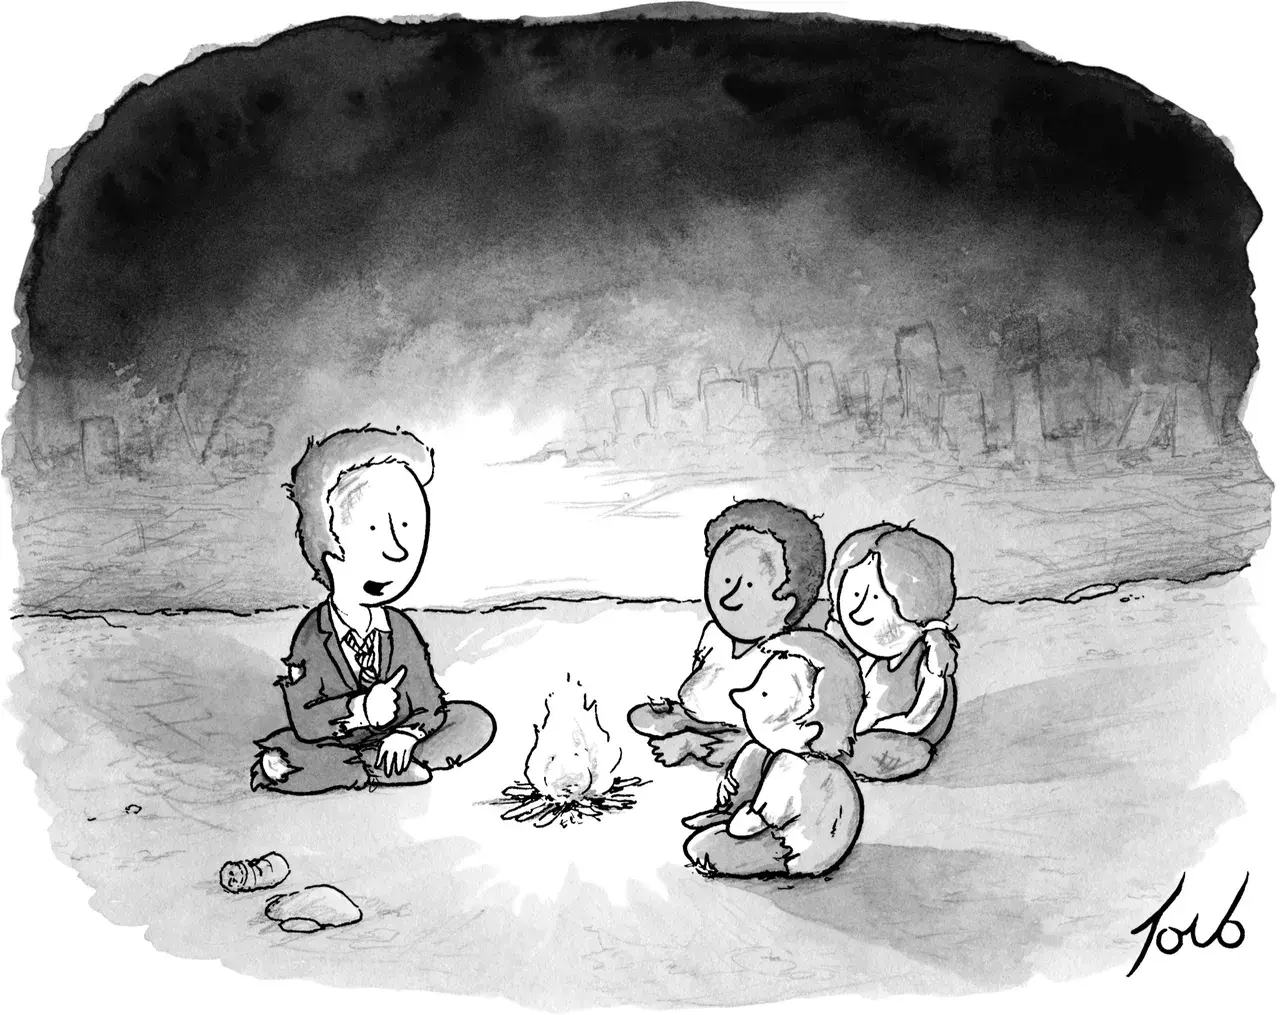 Cartoon.  Man in ripped suit at campfire with children.  Destroyed city in background. ”